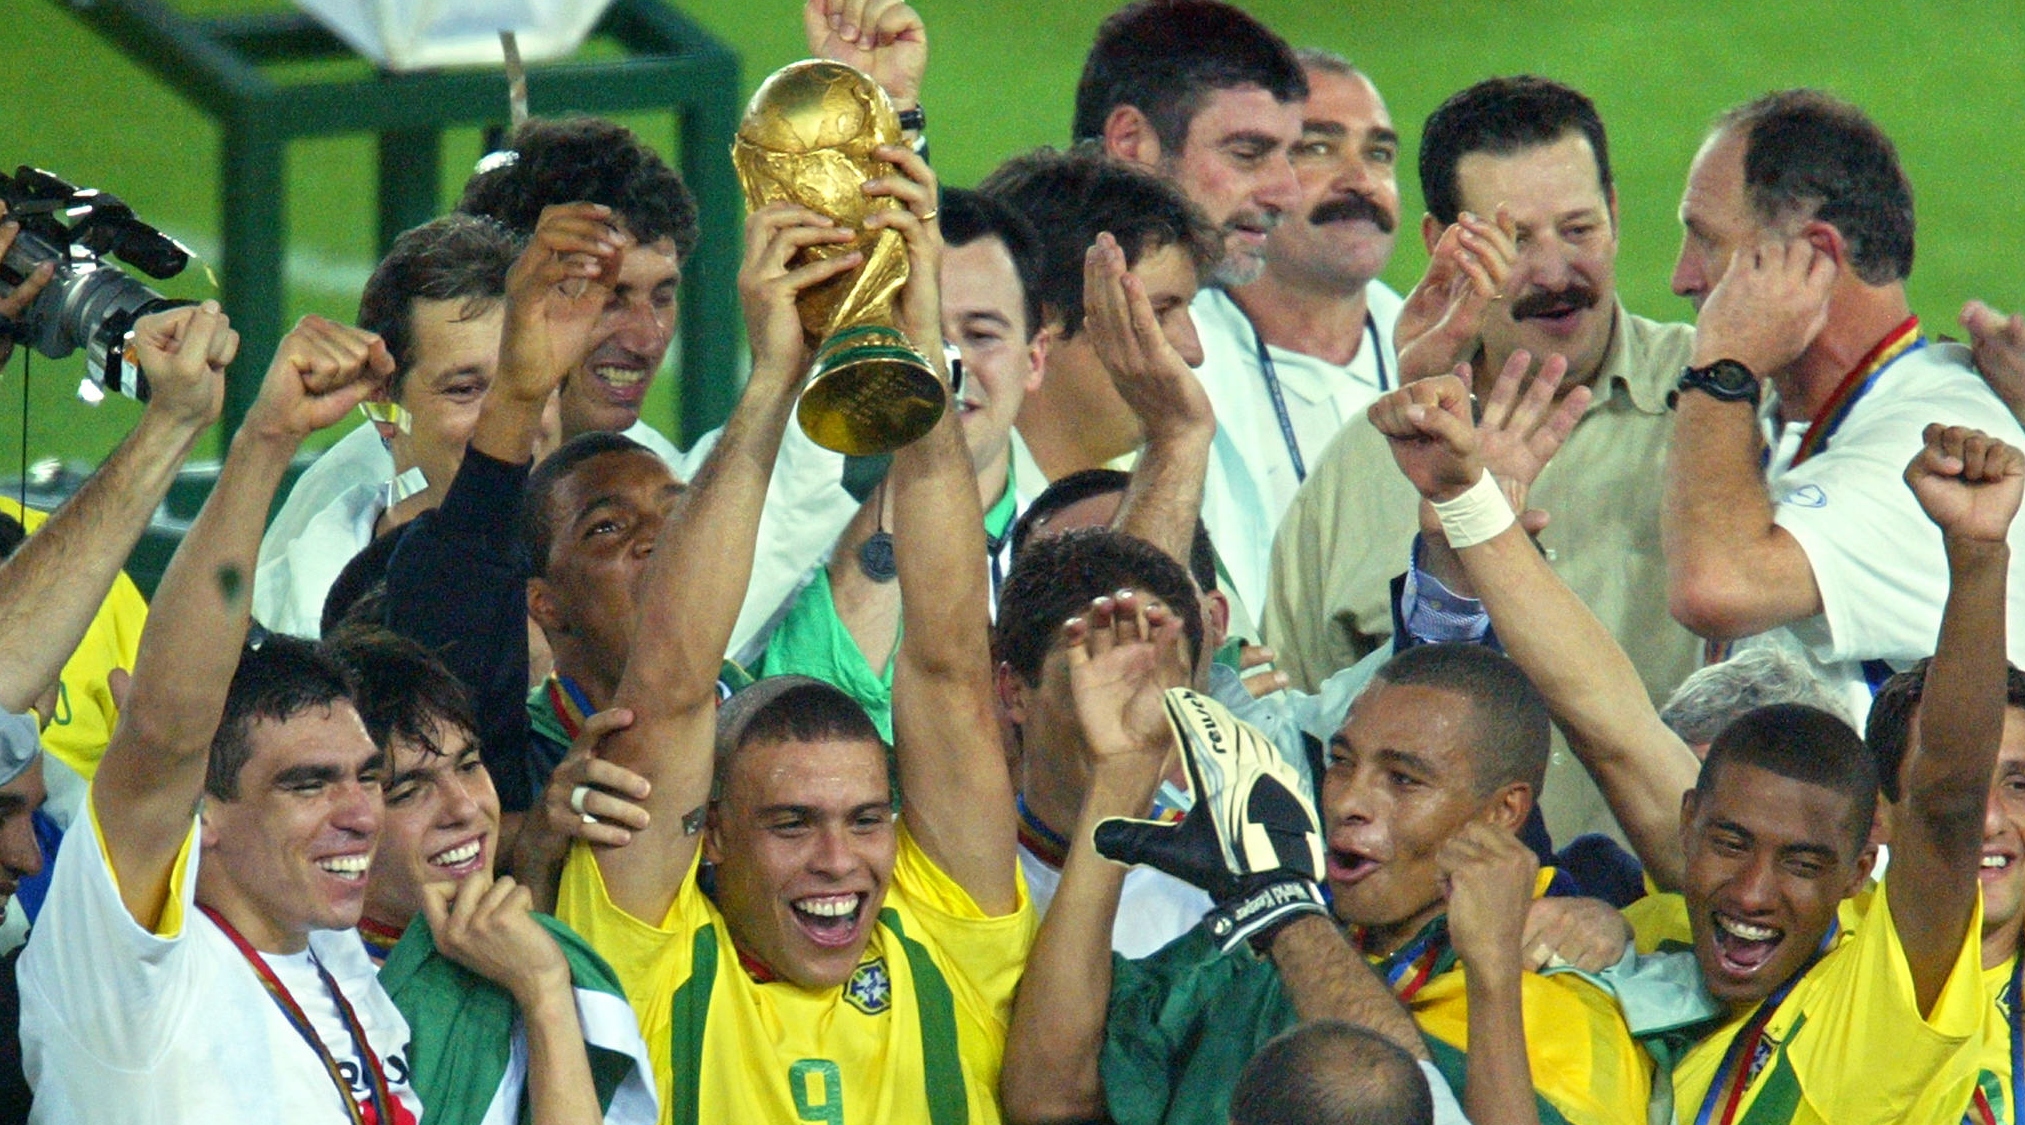 Brazil's forward Ronaldo (C), flanked by teammates, hoists the World Cup trophy during the award ceremony at the International Stadium Yokohama, Japan, on June 30 2002 following Brazil's 2-0 victory against Germany in the 2002 World Cup final